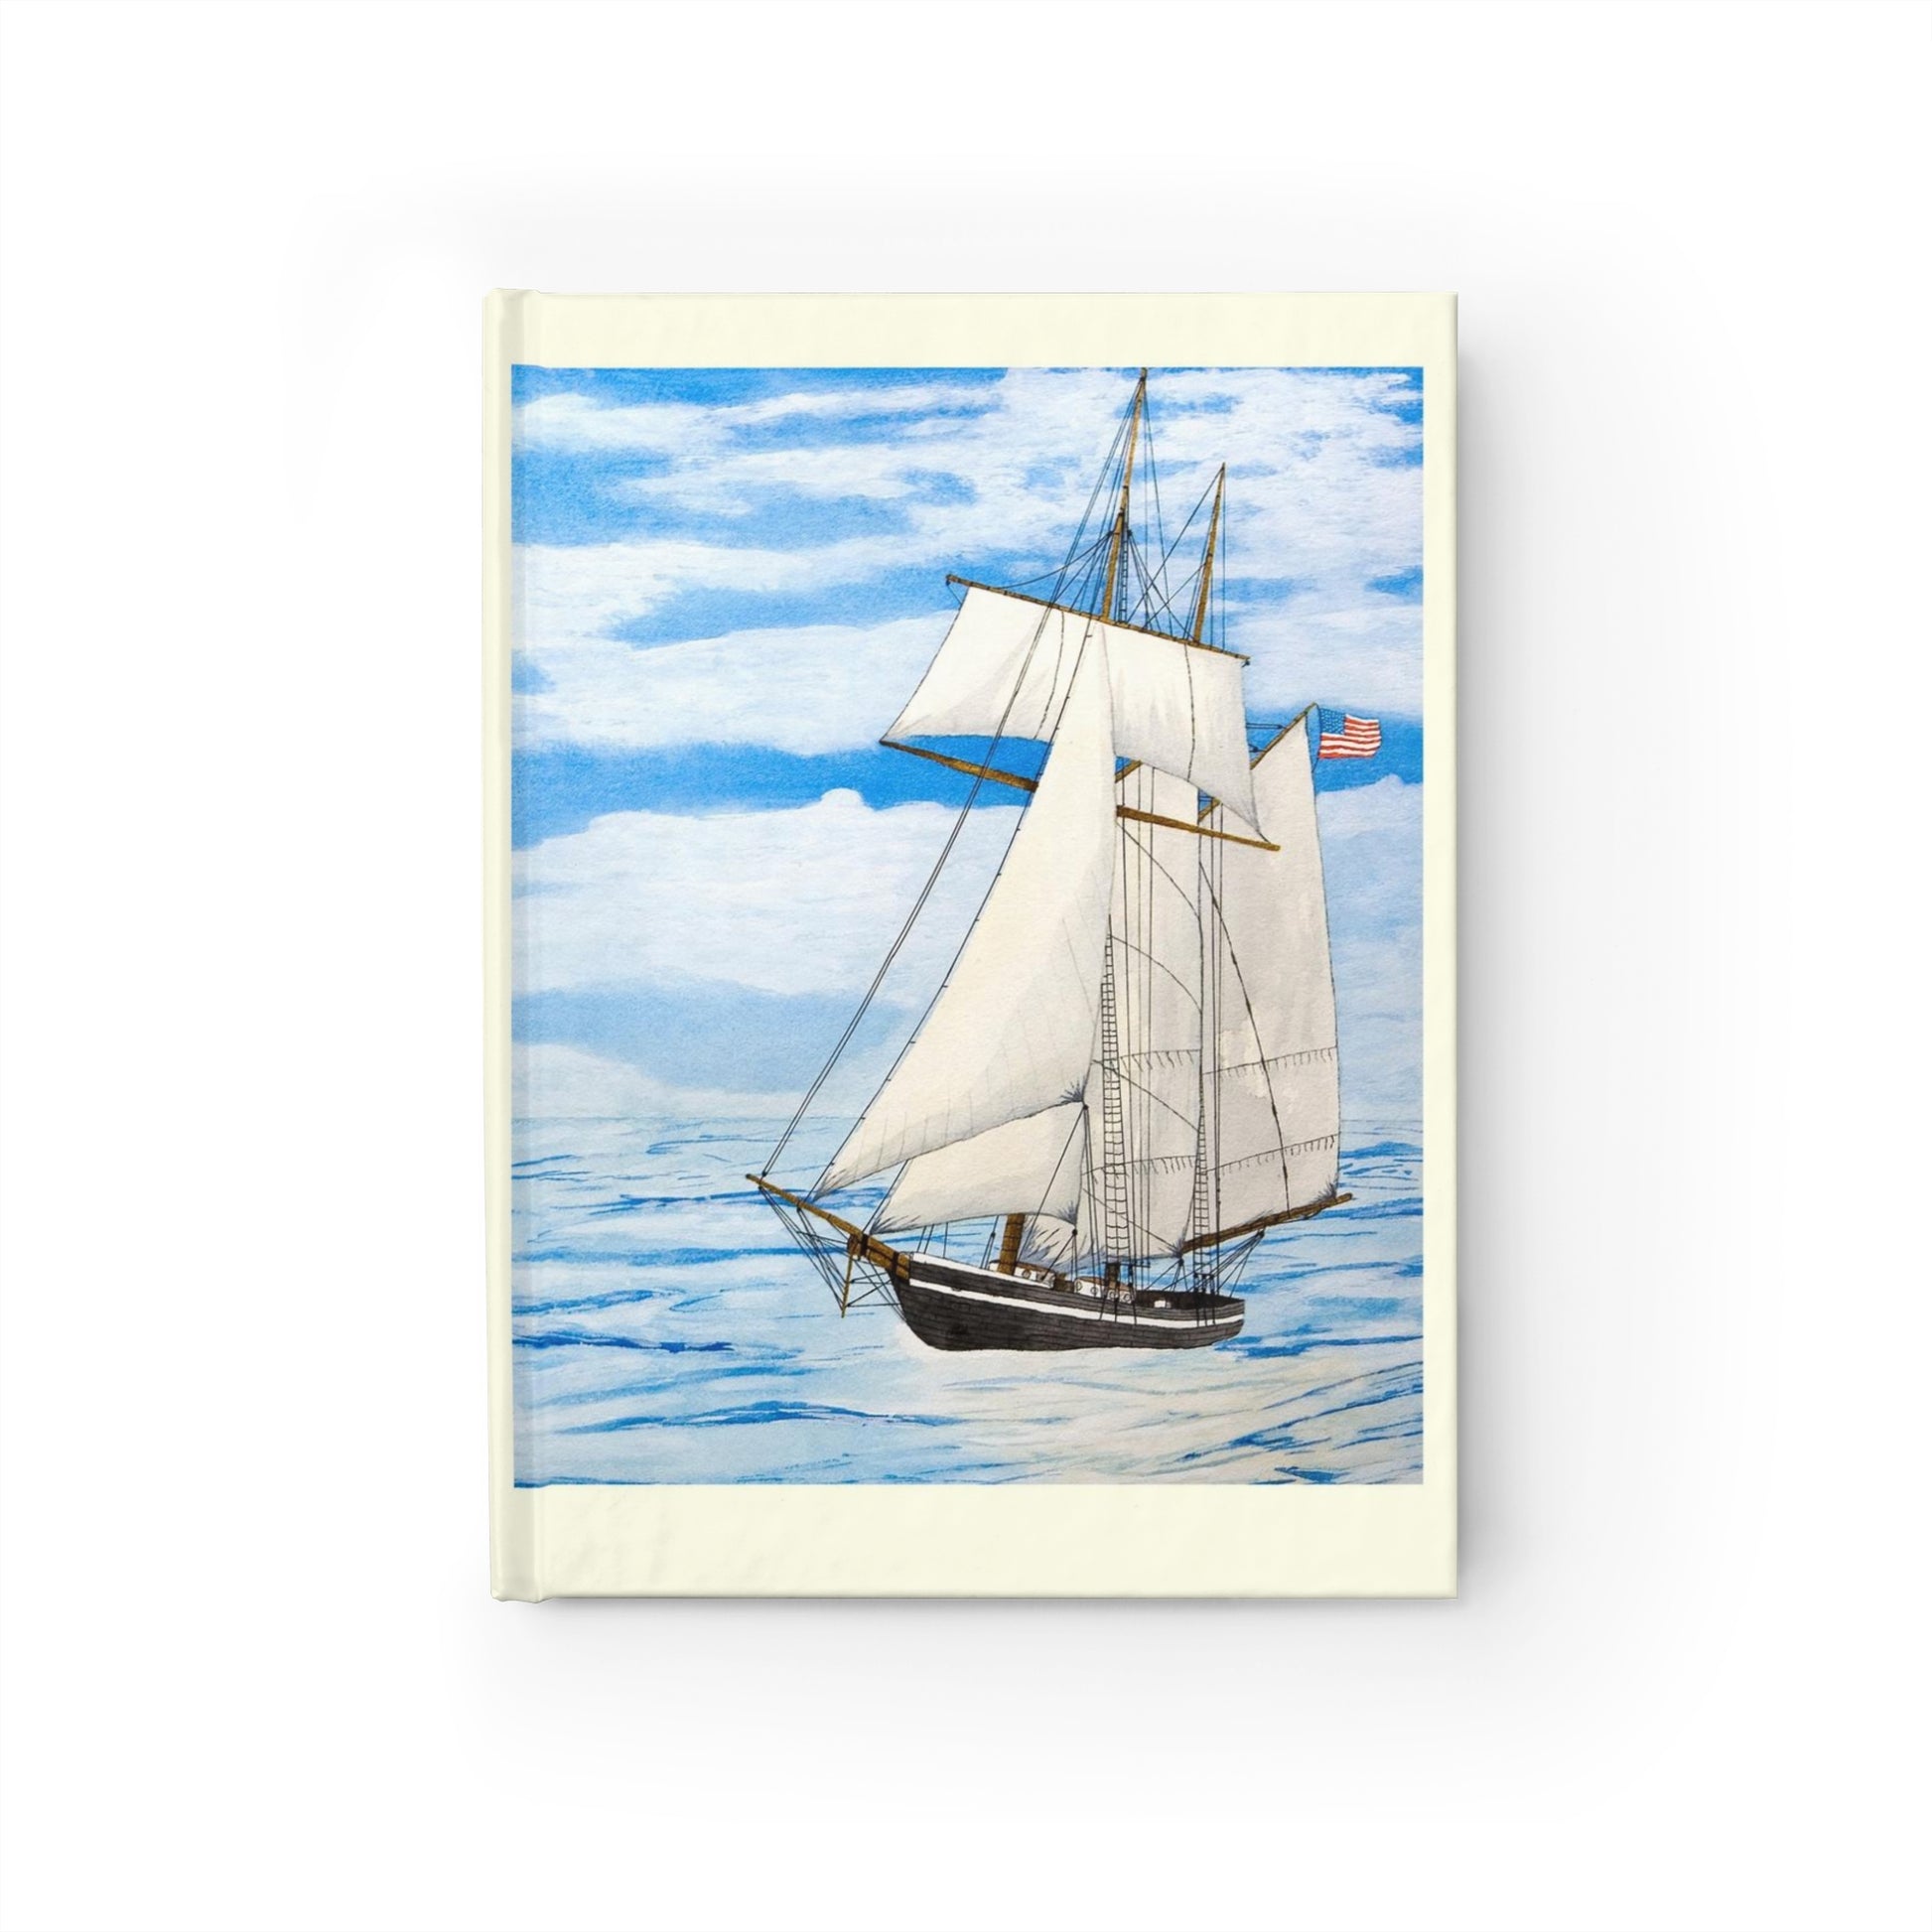 Pleasant Breeze Off Cape May Journal!  The Journal features a small topsail schooner as it enters the Delaware Bay and rounds the point in view of the Cape May, New Jersey Lighthouse.     The Journal design is a reproduction of an original watercolor by Lee M. Buchanan